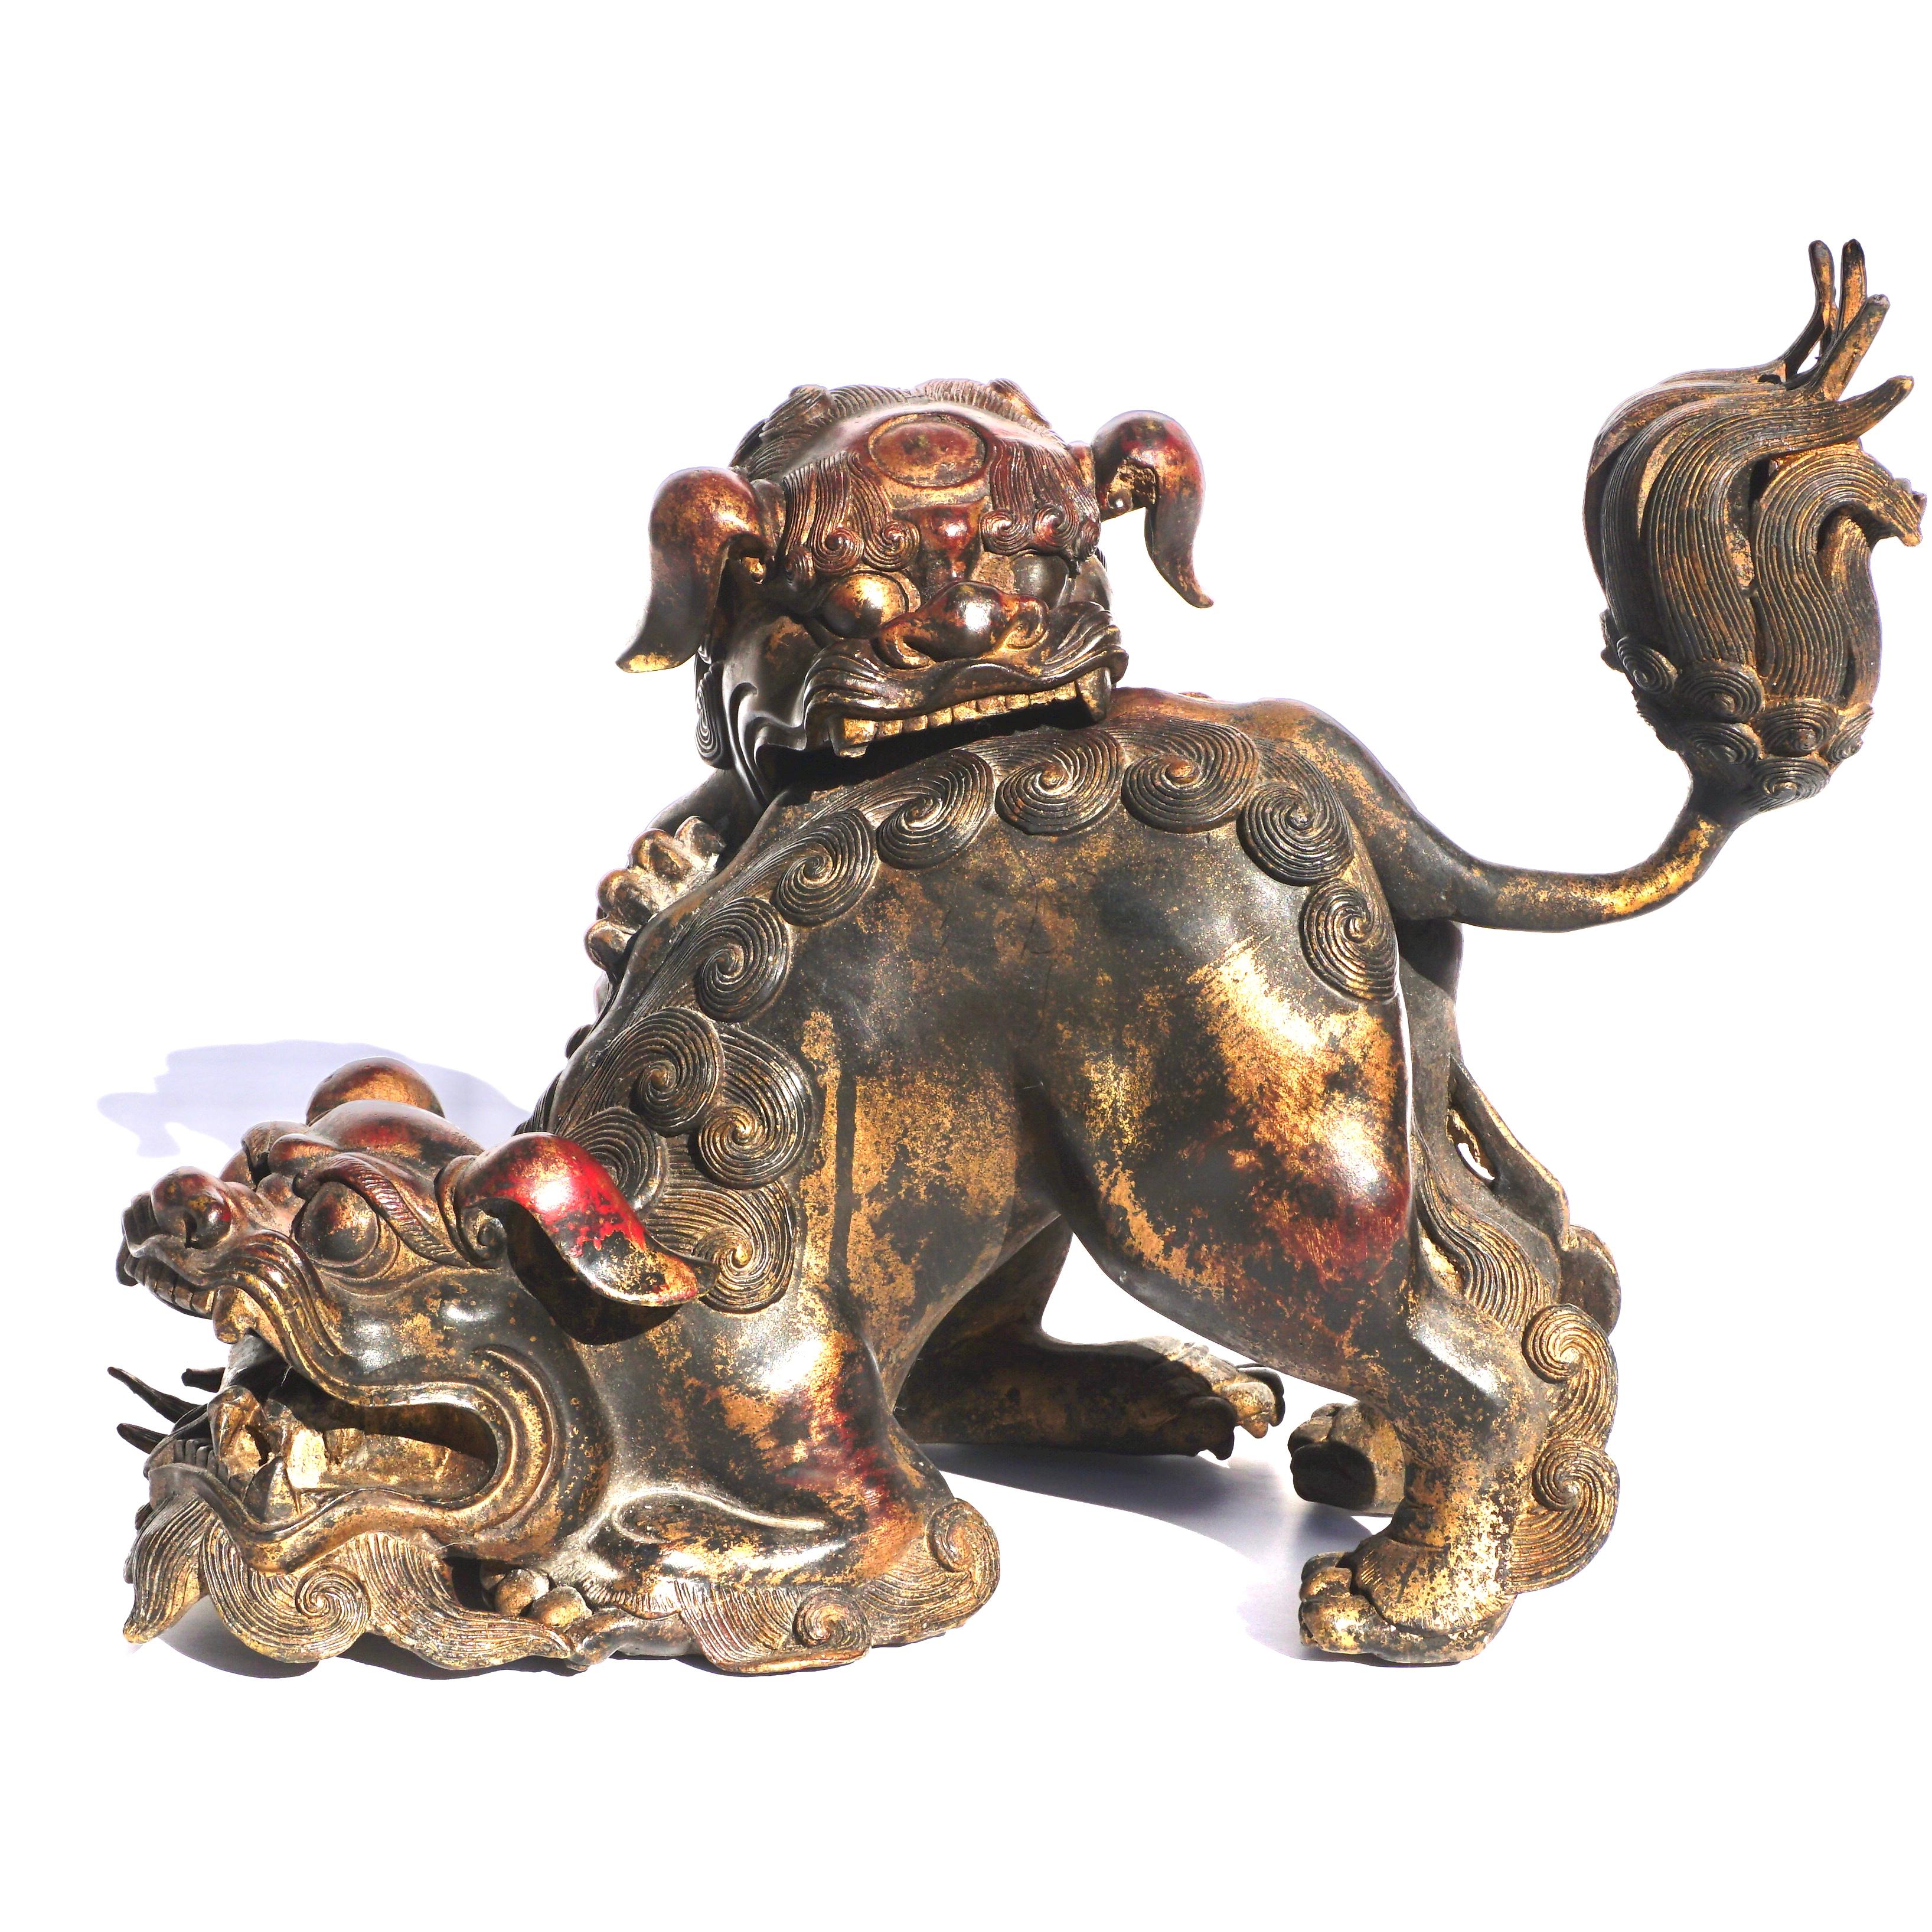 Bronze Gilt and lacquered Incense Burner
Qing Dynasty, Circa 1880
Ming Style

A whimsical and playful pair of attached foo dogs. One dog is biting the back of his partner who is chewing on his foot. The top head comes off to place incense inside